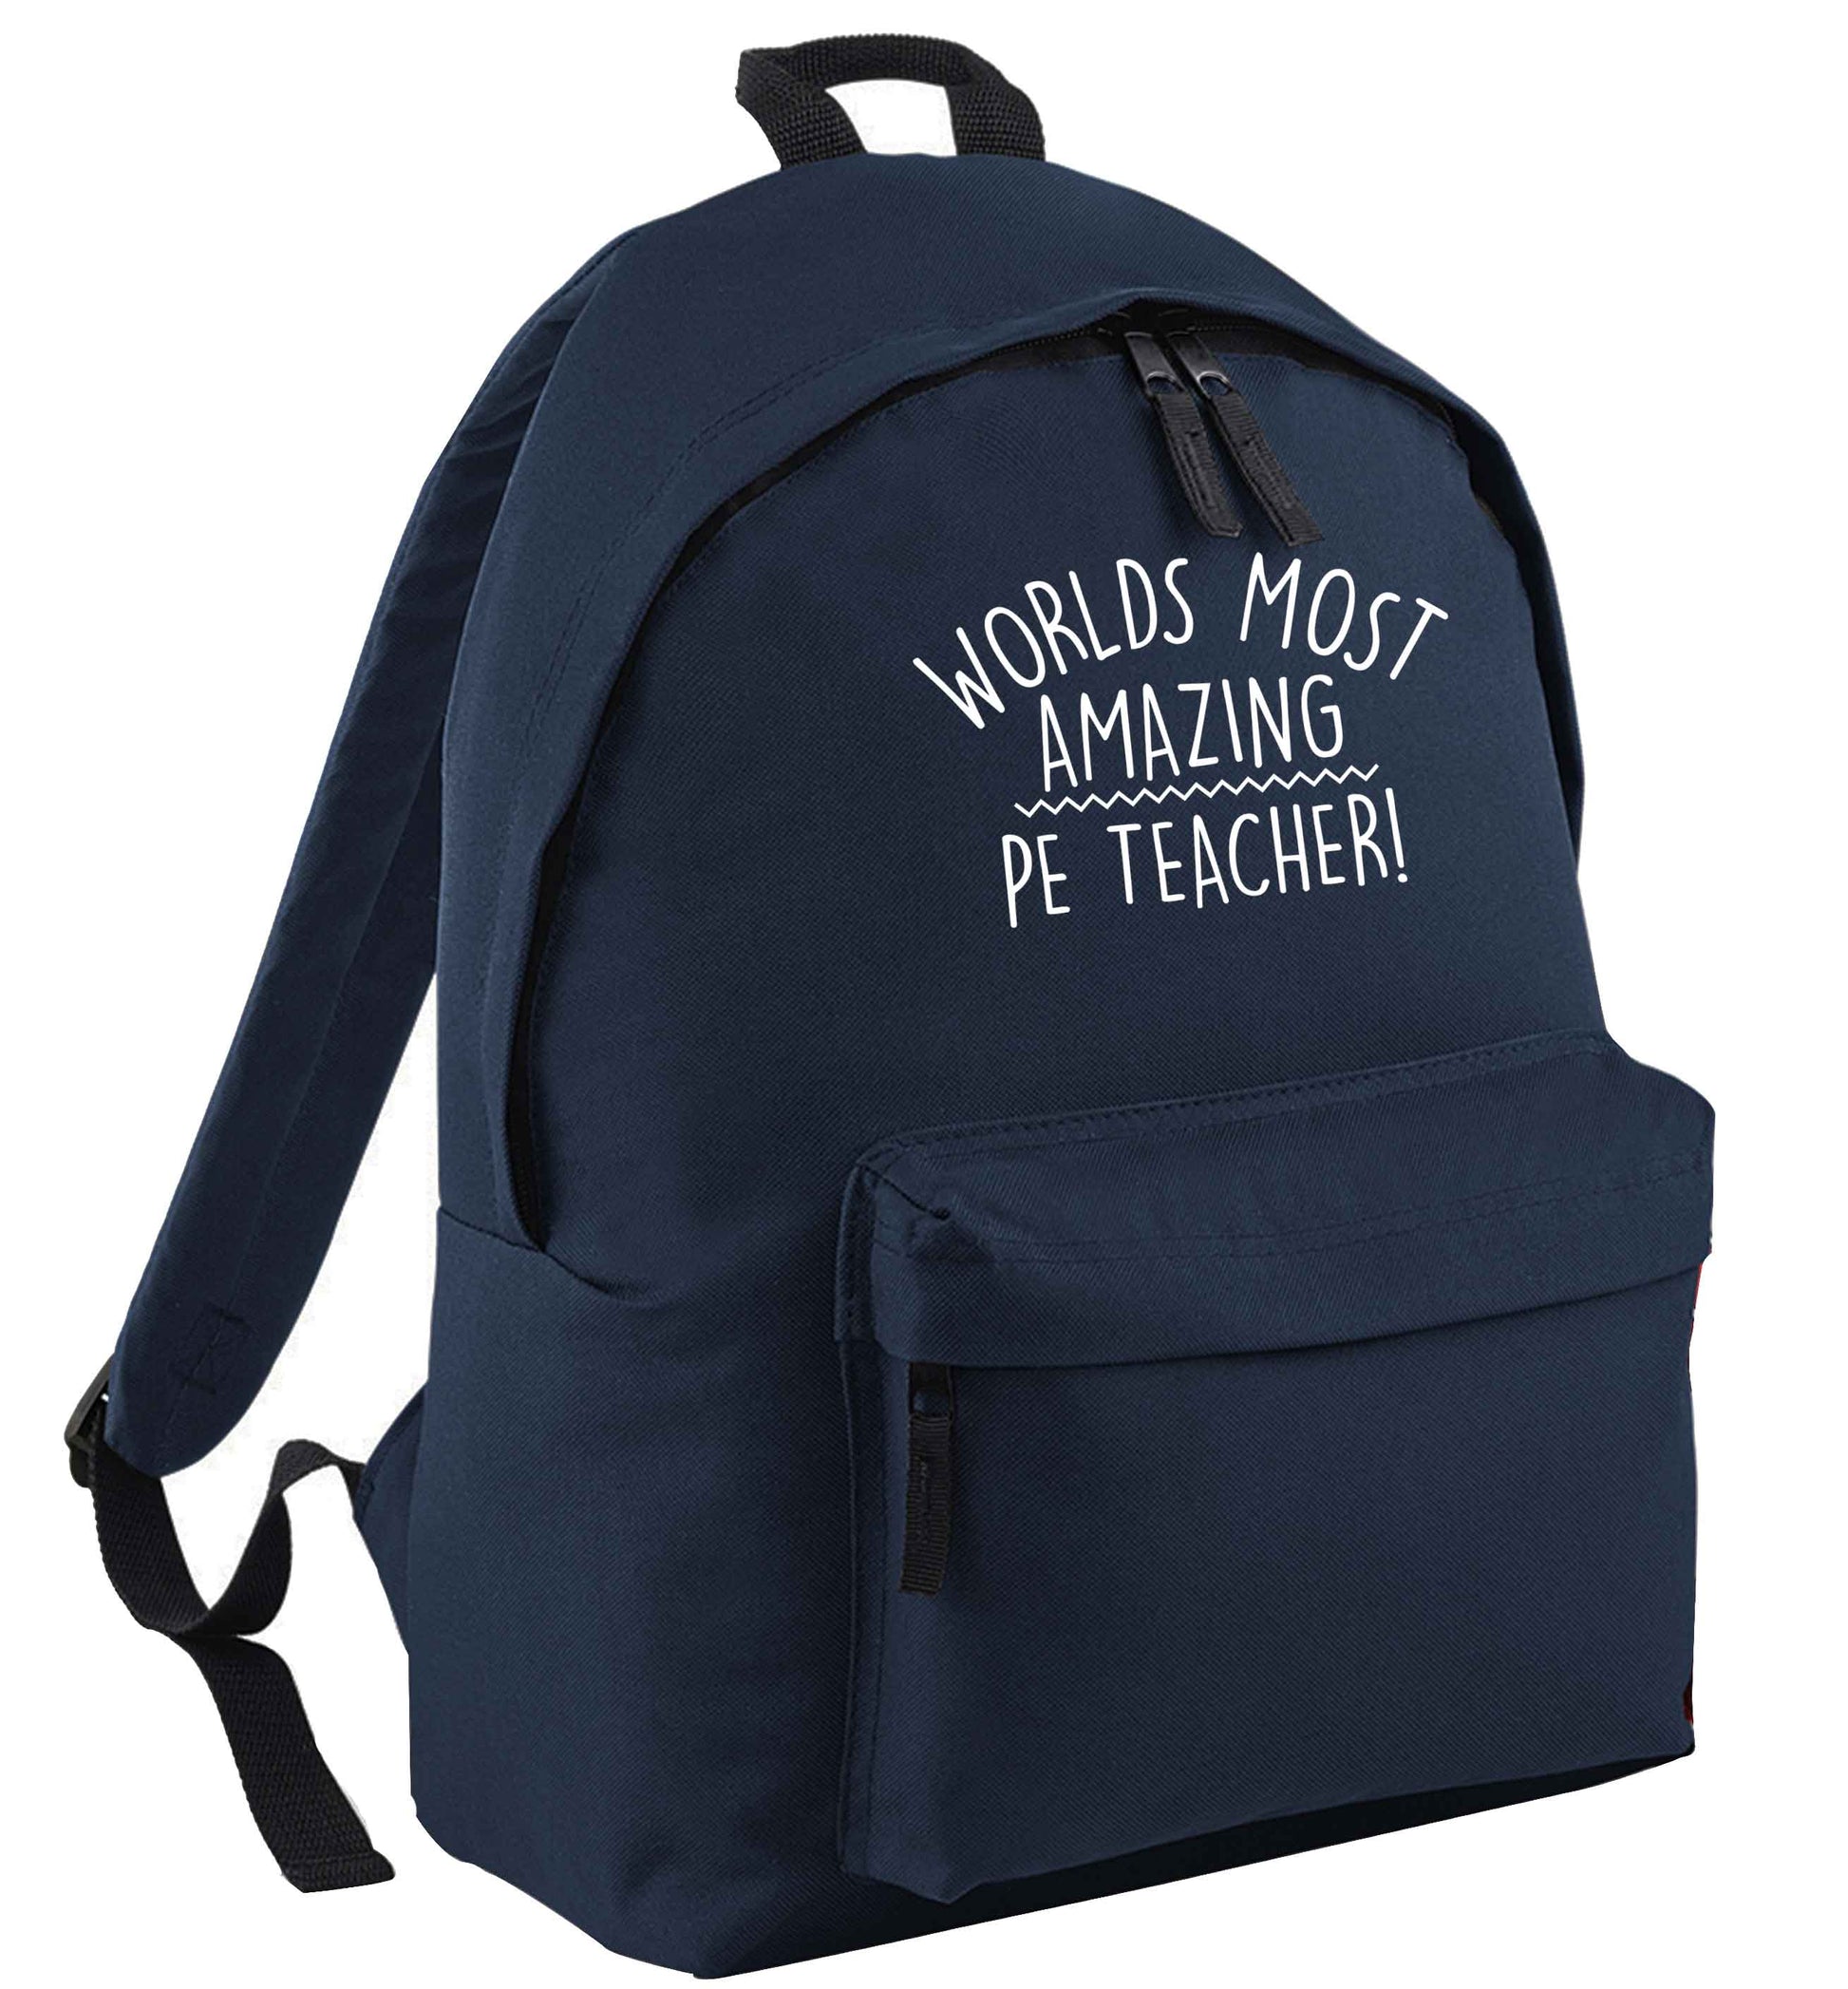 Worlds most amazing PE teacher navy adults backpack